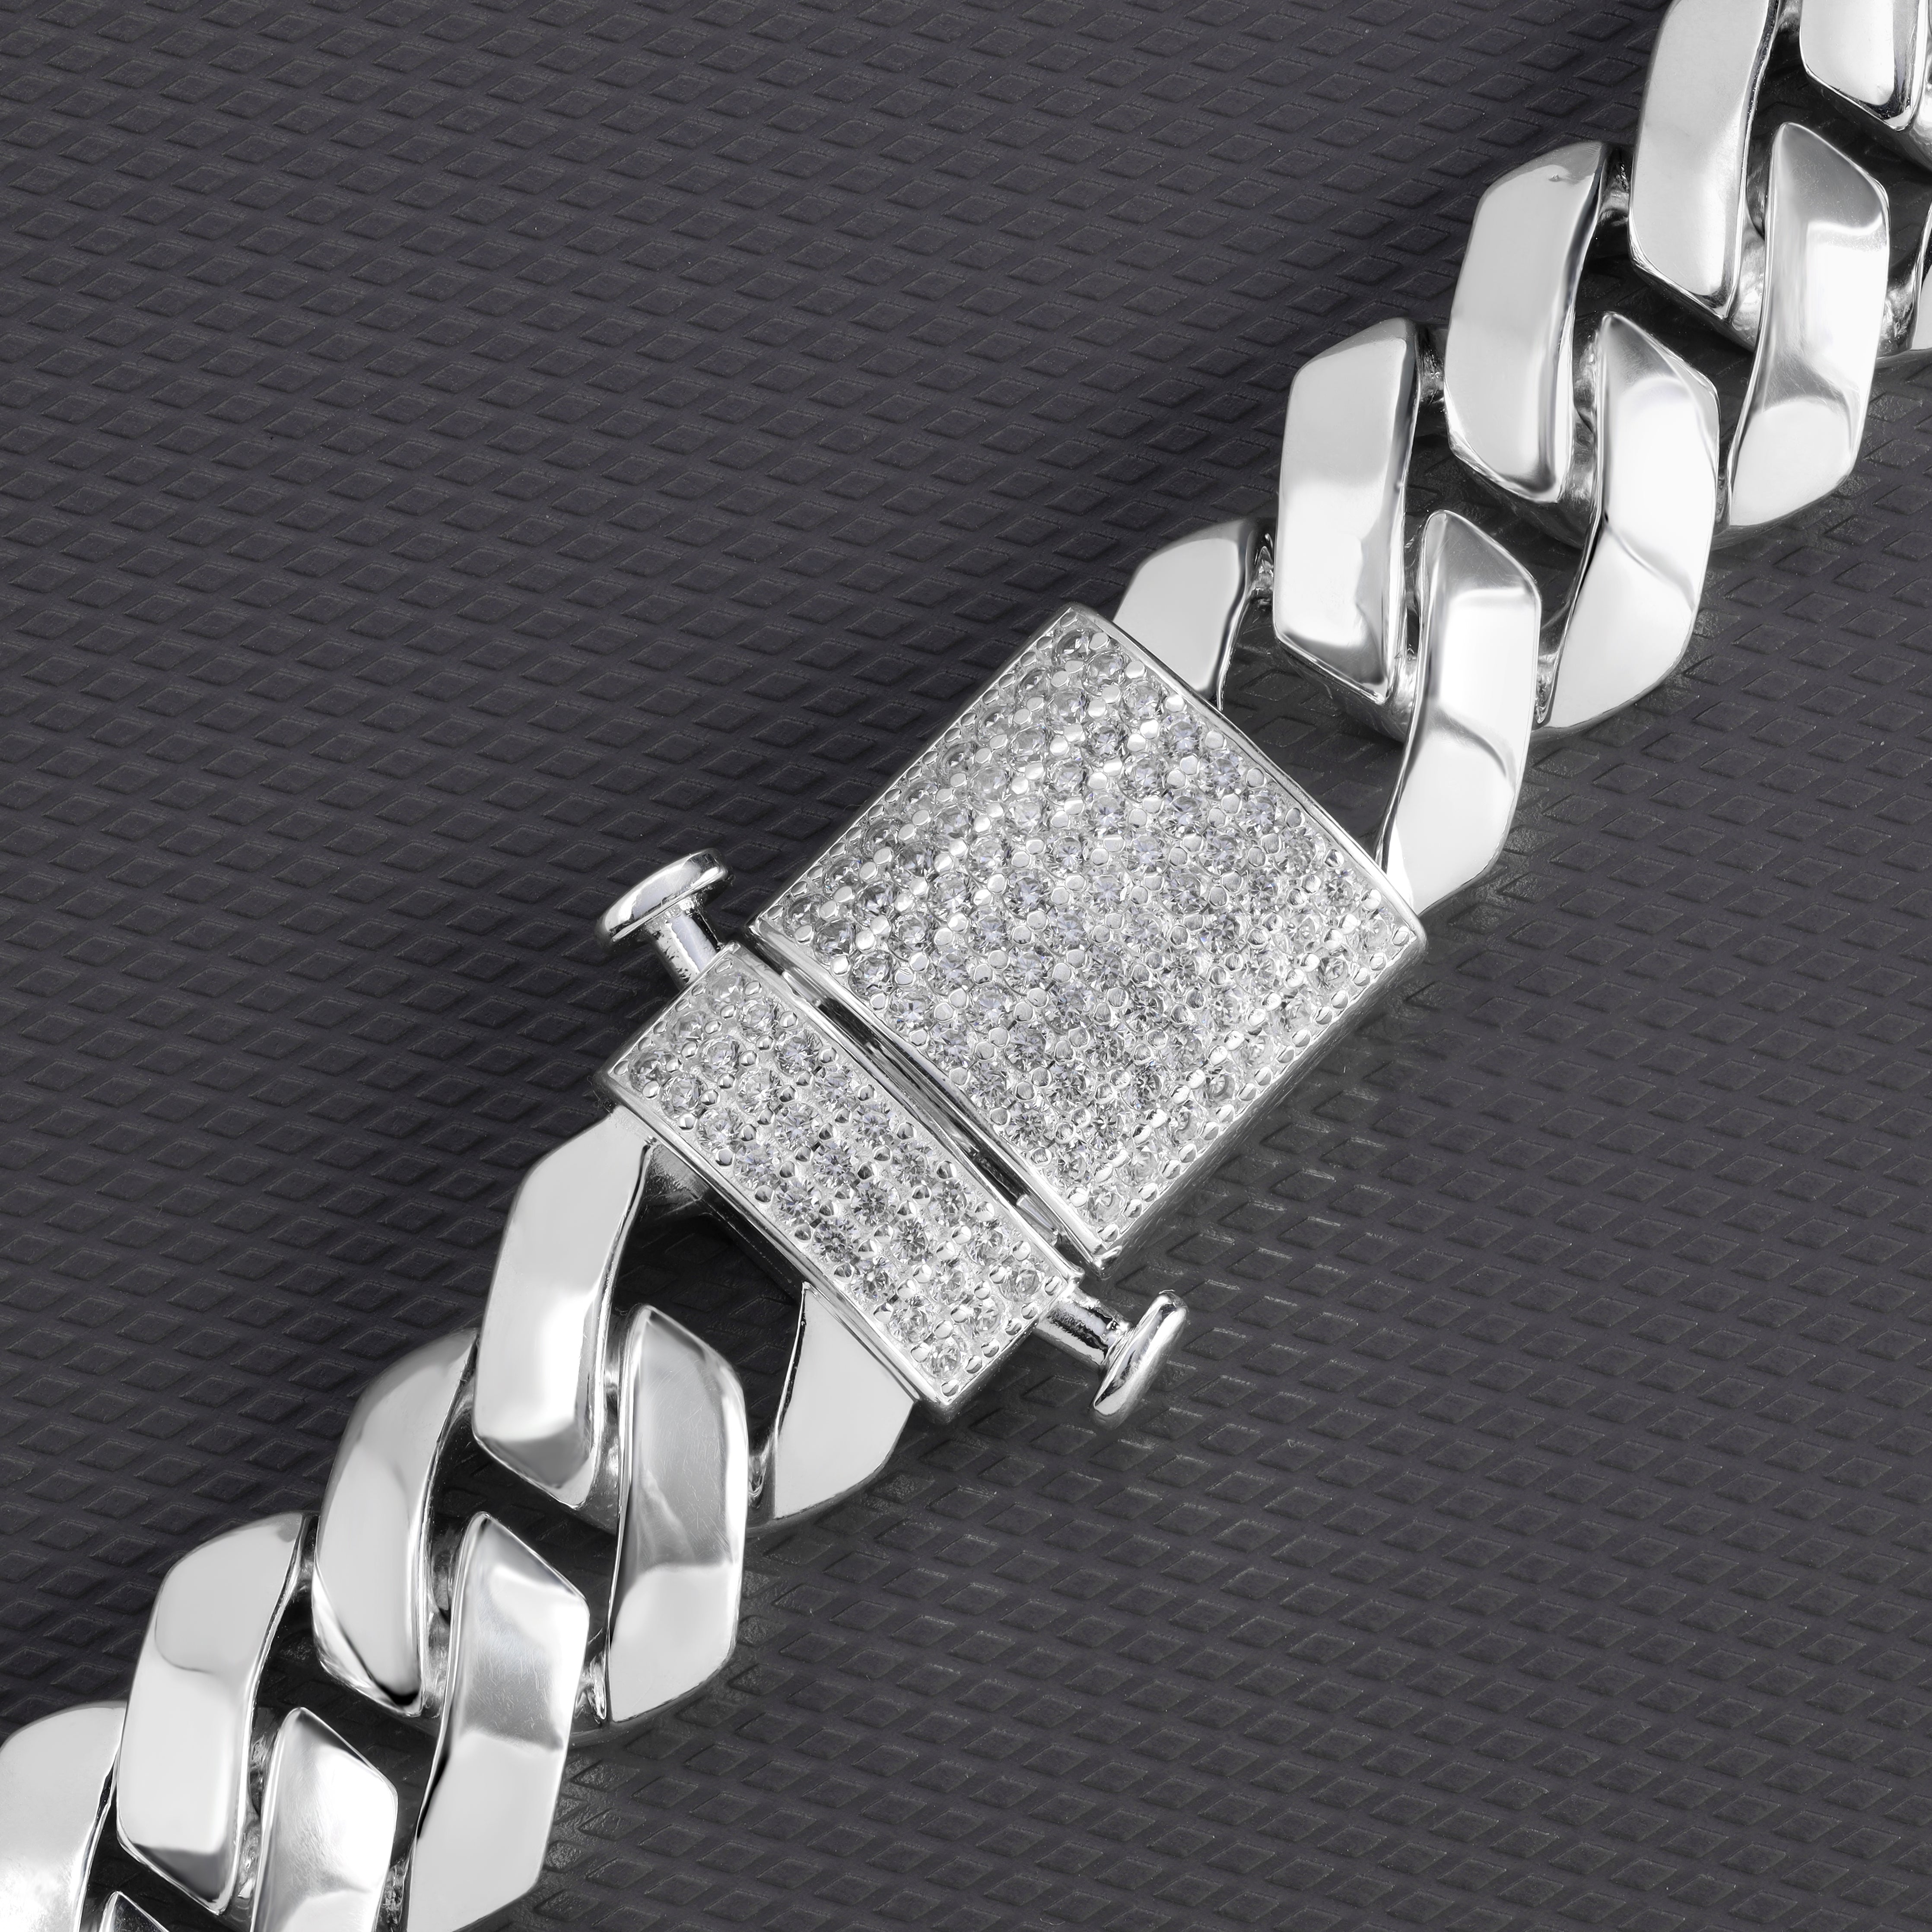 Iced Out Stil Miami Cuban Link Chain 15mm breit 50cm lang 925 Sterling Silber (K985) - Taipan Schmuck